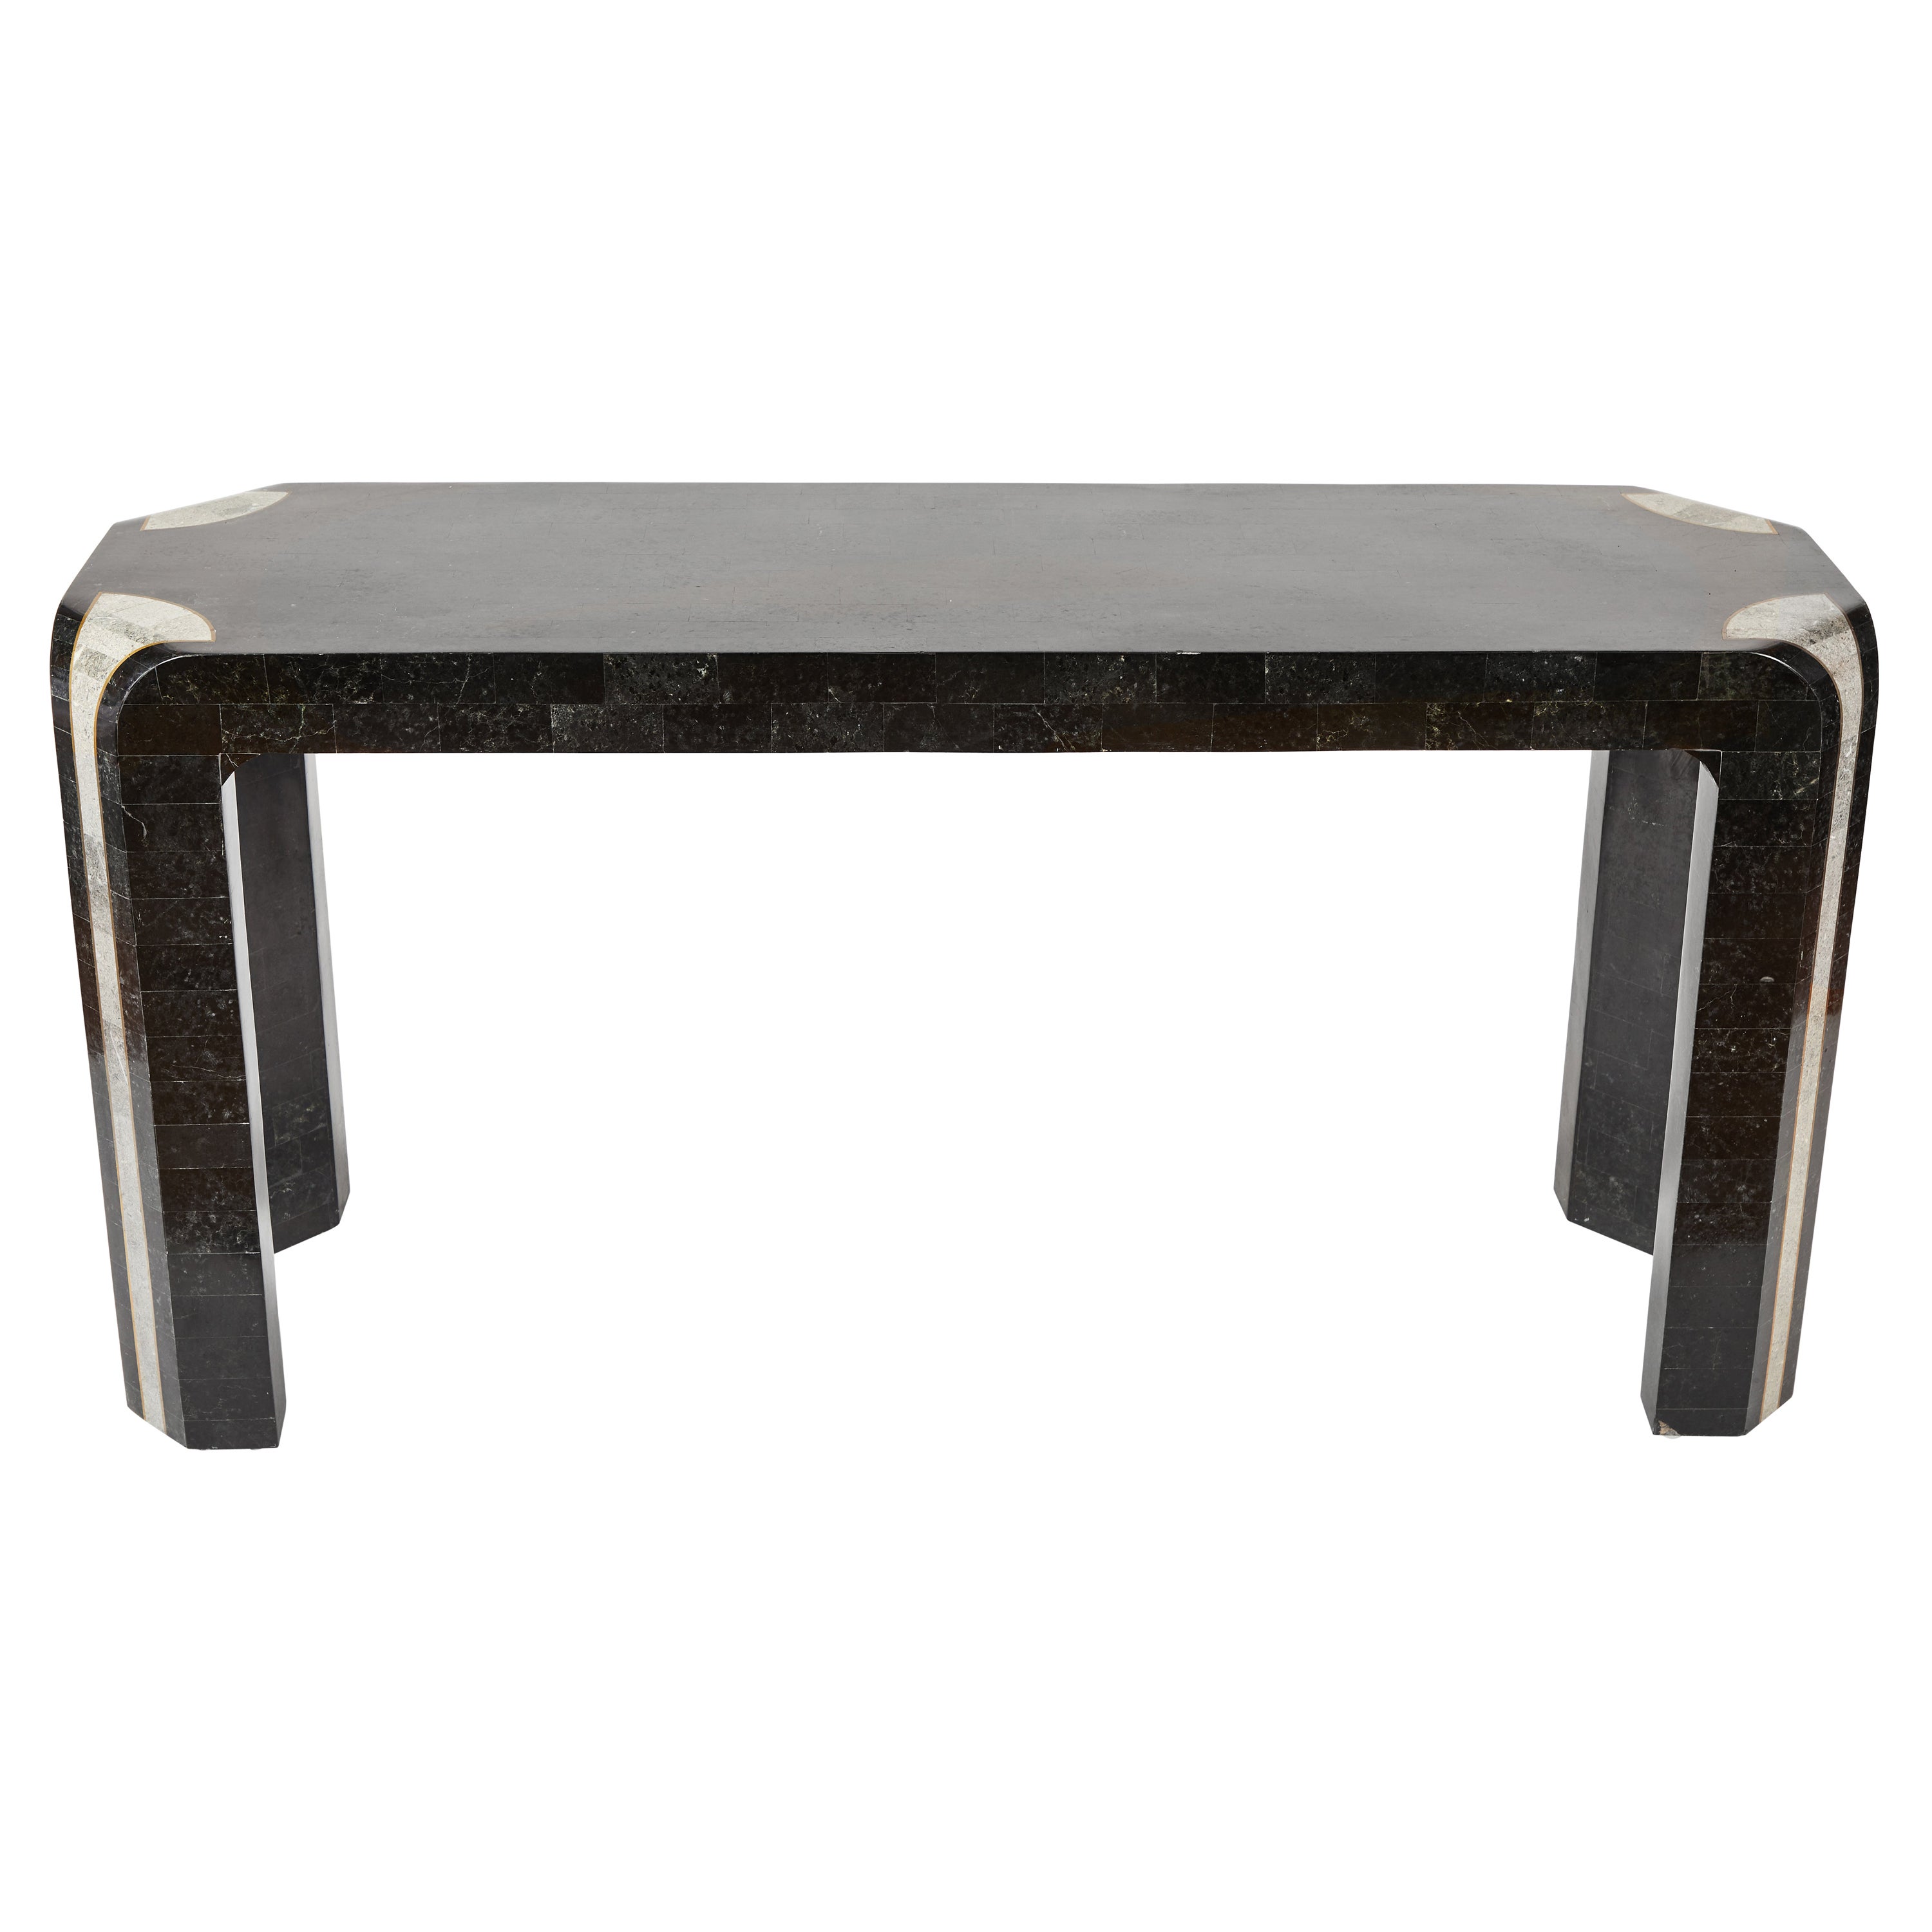 Waterfall Marble and Inlaid Brass Console Table